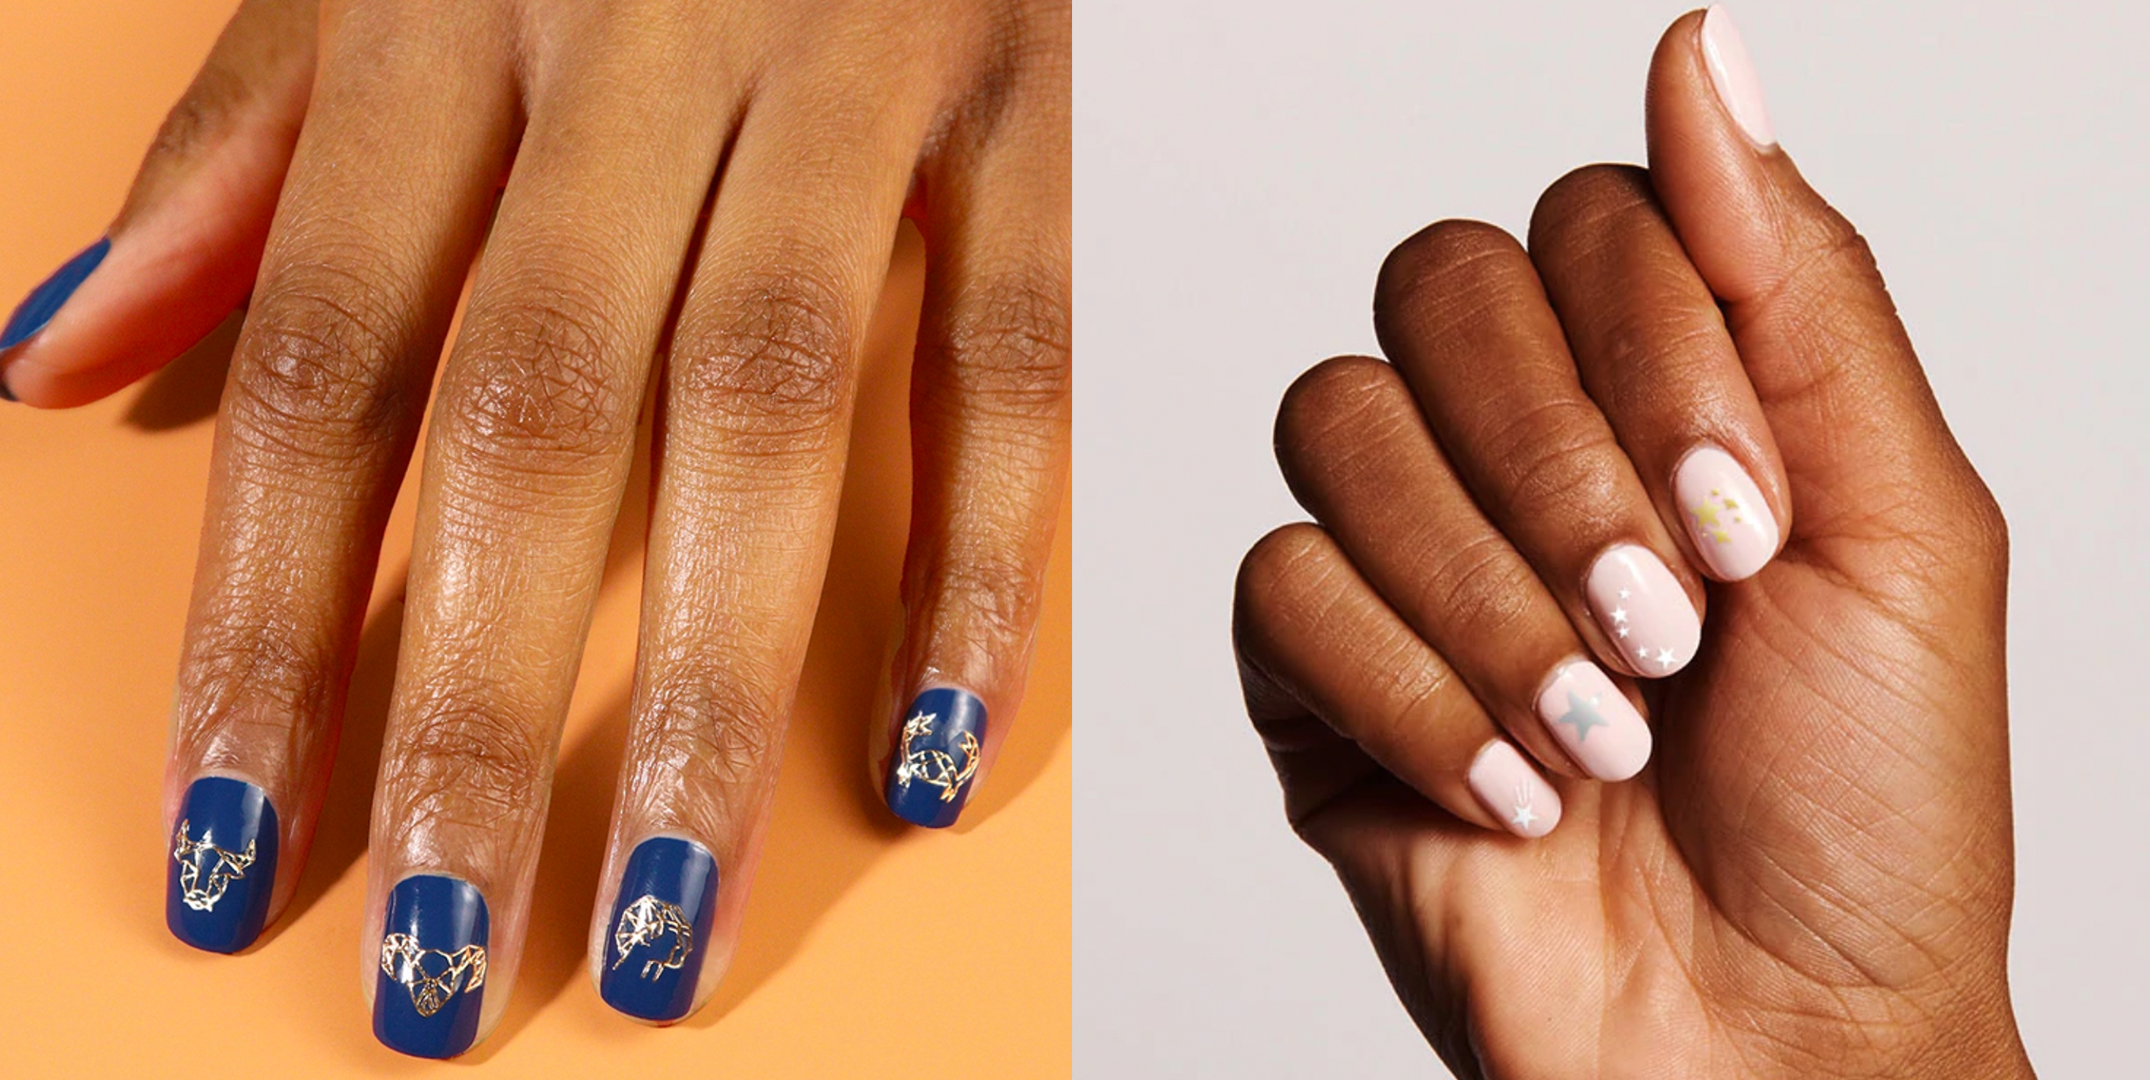 12 best products for press-on nails, according to experts